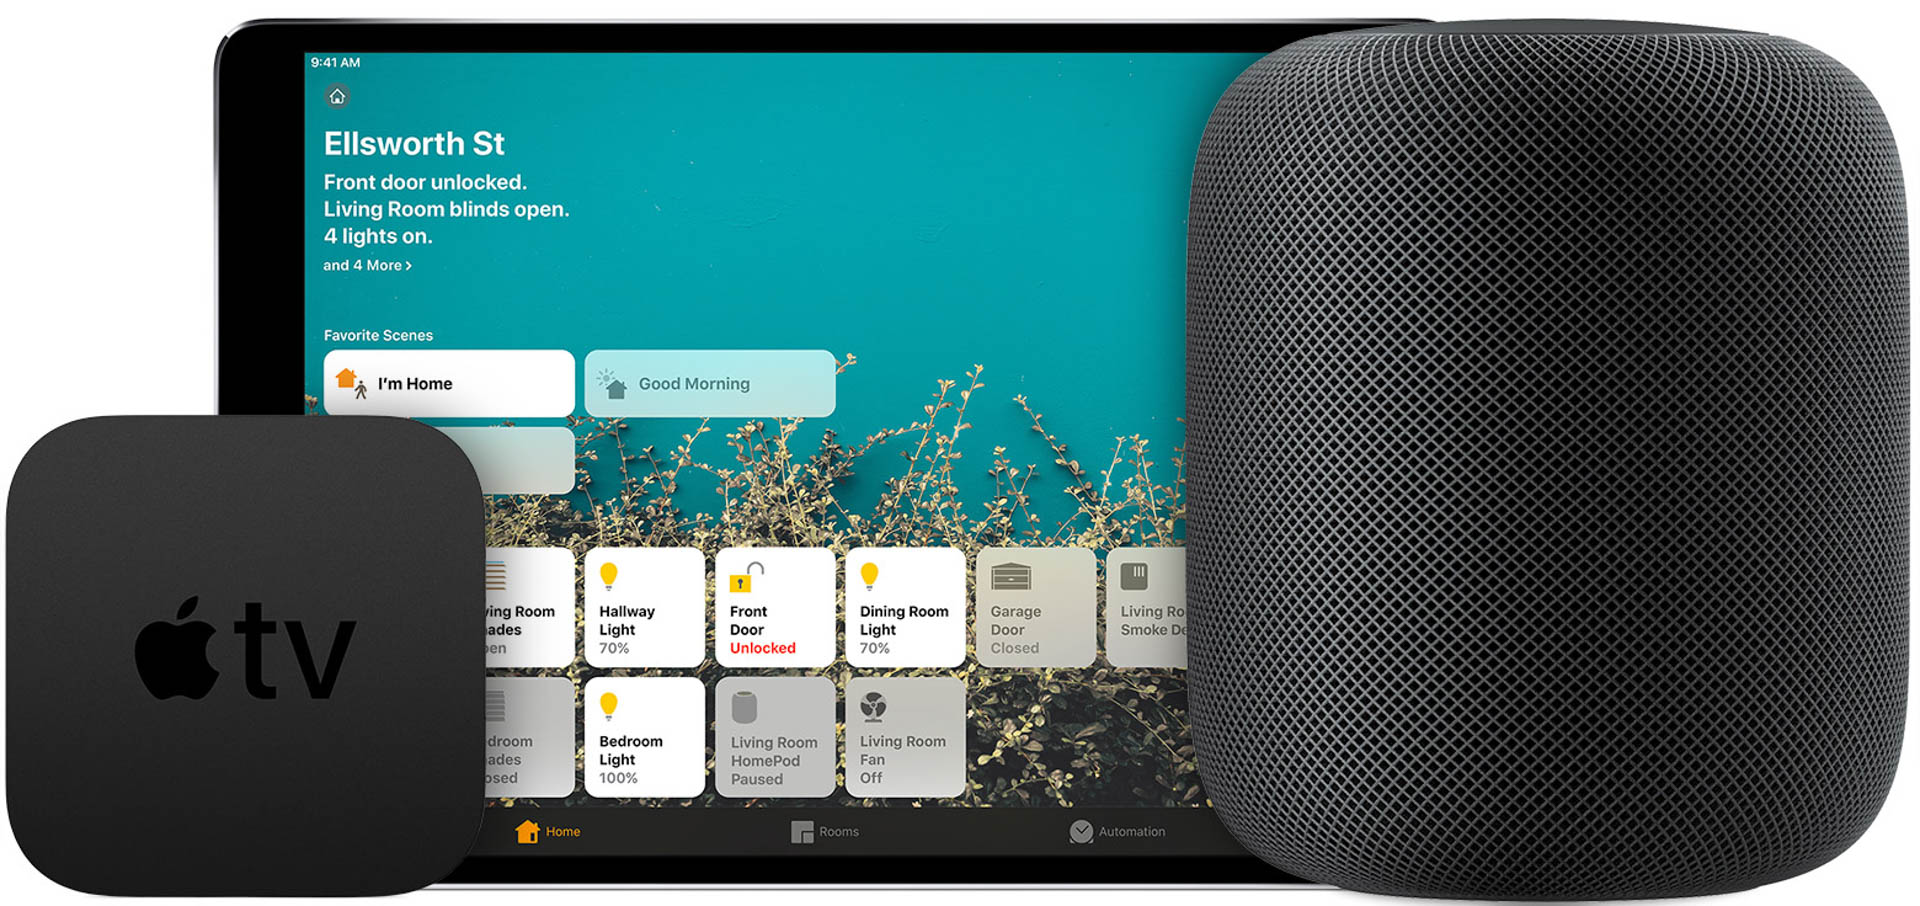 You may already have Apple devices in your home that can be set up as HomeKit Home Hubs. Apple TV, iPad, and HomePod devices can be used to enhance HomeKit functionality for all accessories.  Image: Apple.